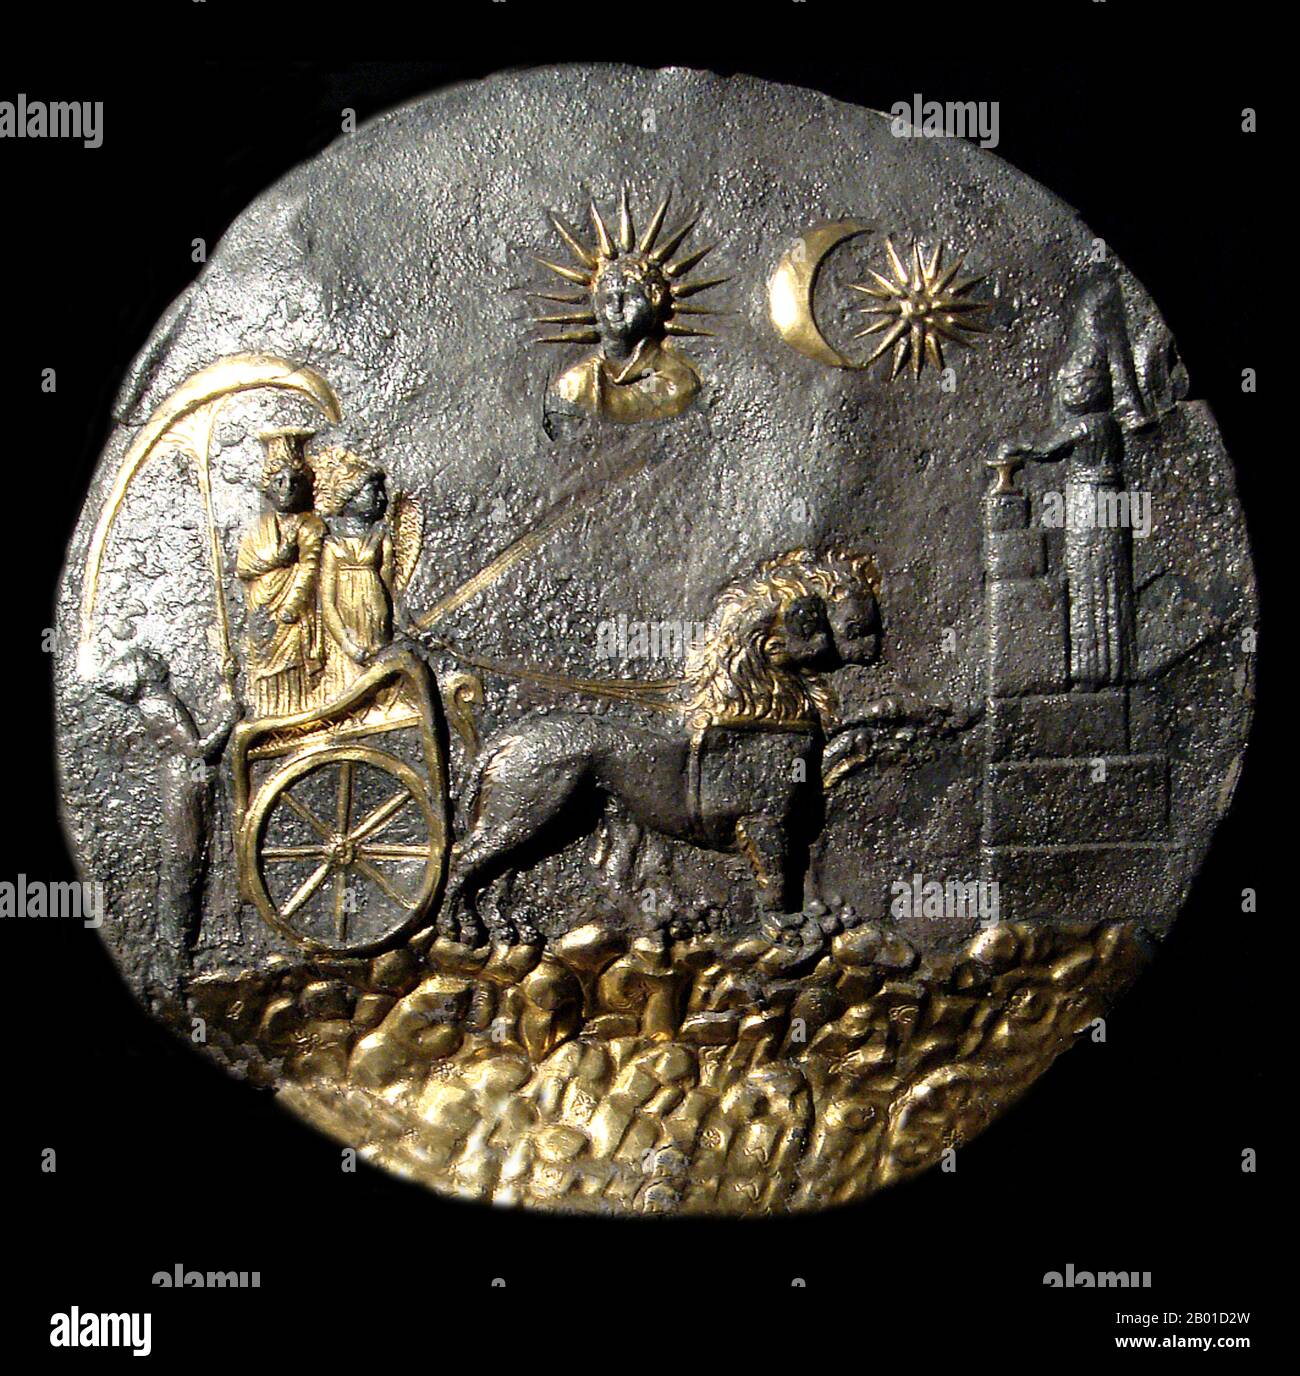 Afghanistan: A plate depicting Cybele and Nike being pulled by lions, a votive sacrifice and the Sun God Helios. Ai Khanoum, 3rd century BCE.  Ai-Khanoum or Ay Khanum ( 'Lady of the Moon' in Uzbek, probably the historical Alexandria on the Oxus, also possibly named Eucratidia), was founded in the 4th century BCE, following the conquests of Alexander the Great and was one of the primary cities of the Greco-Bactrian kingdom.  The city is located in Kunduz Province northern Afghanistan, at the confluence of the Oxus river (today's Amu Darya) and the Kokcha river. Stock Photo